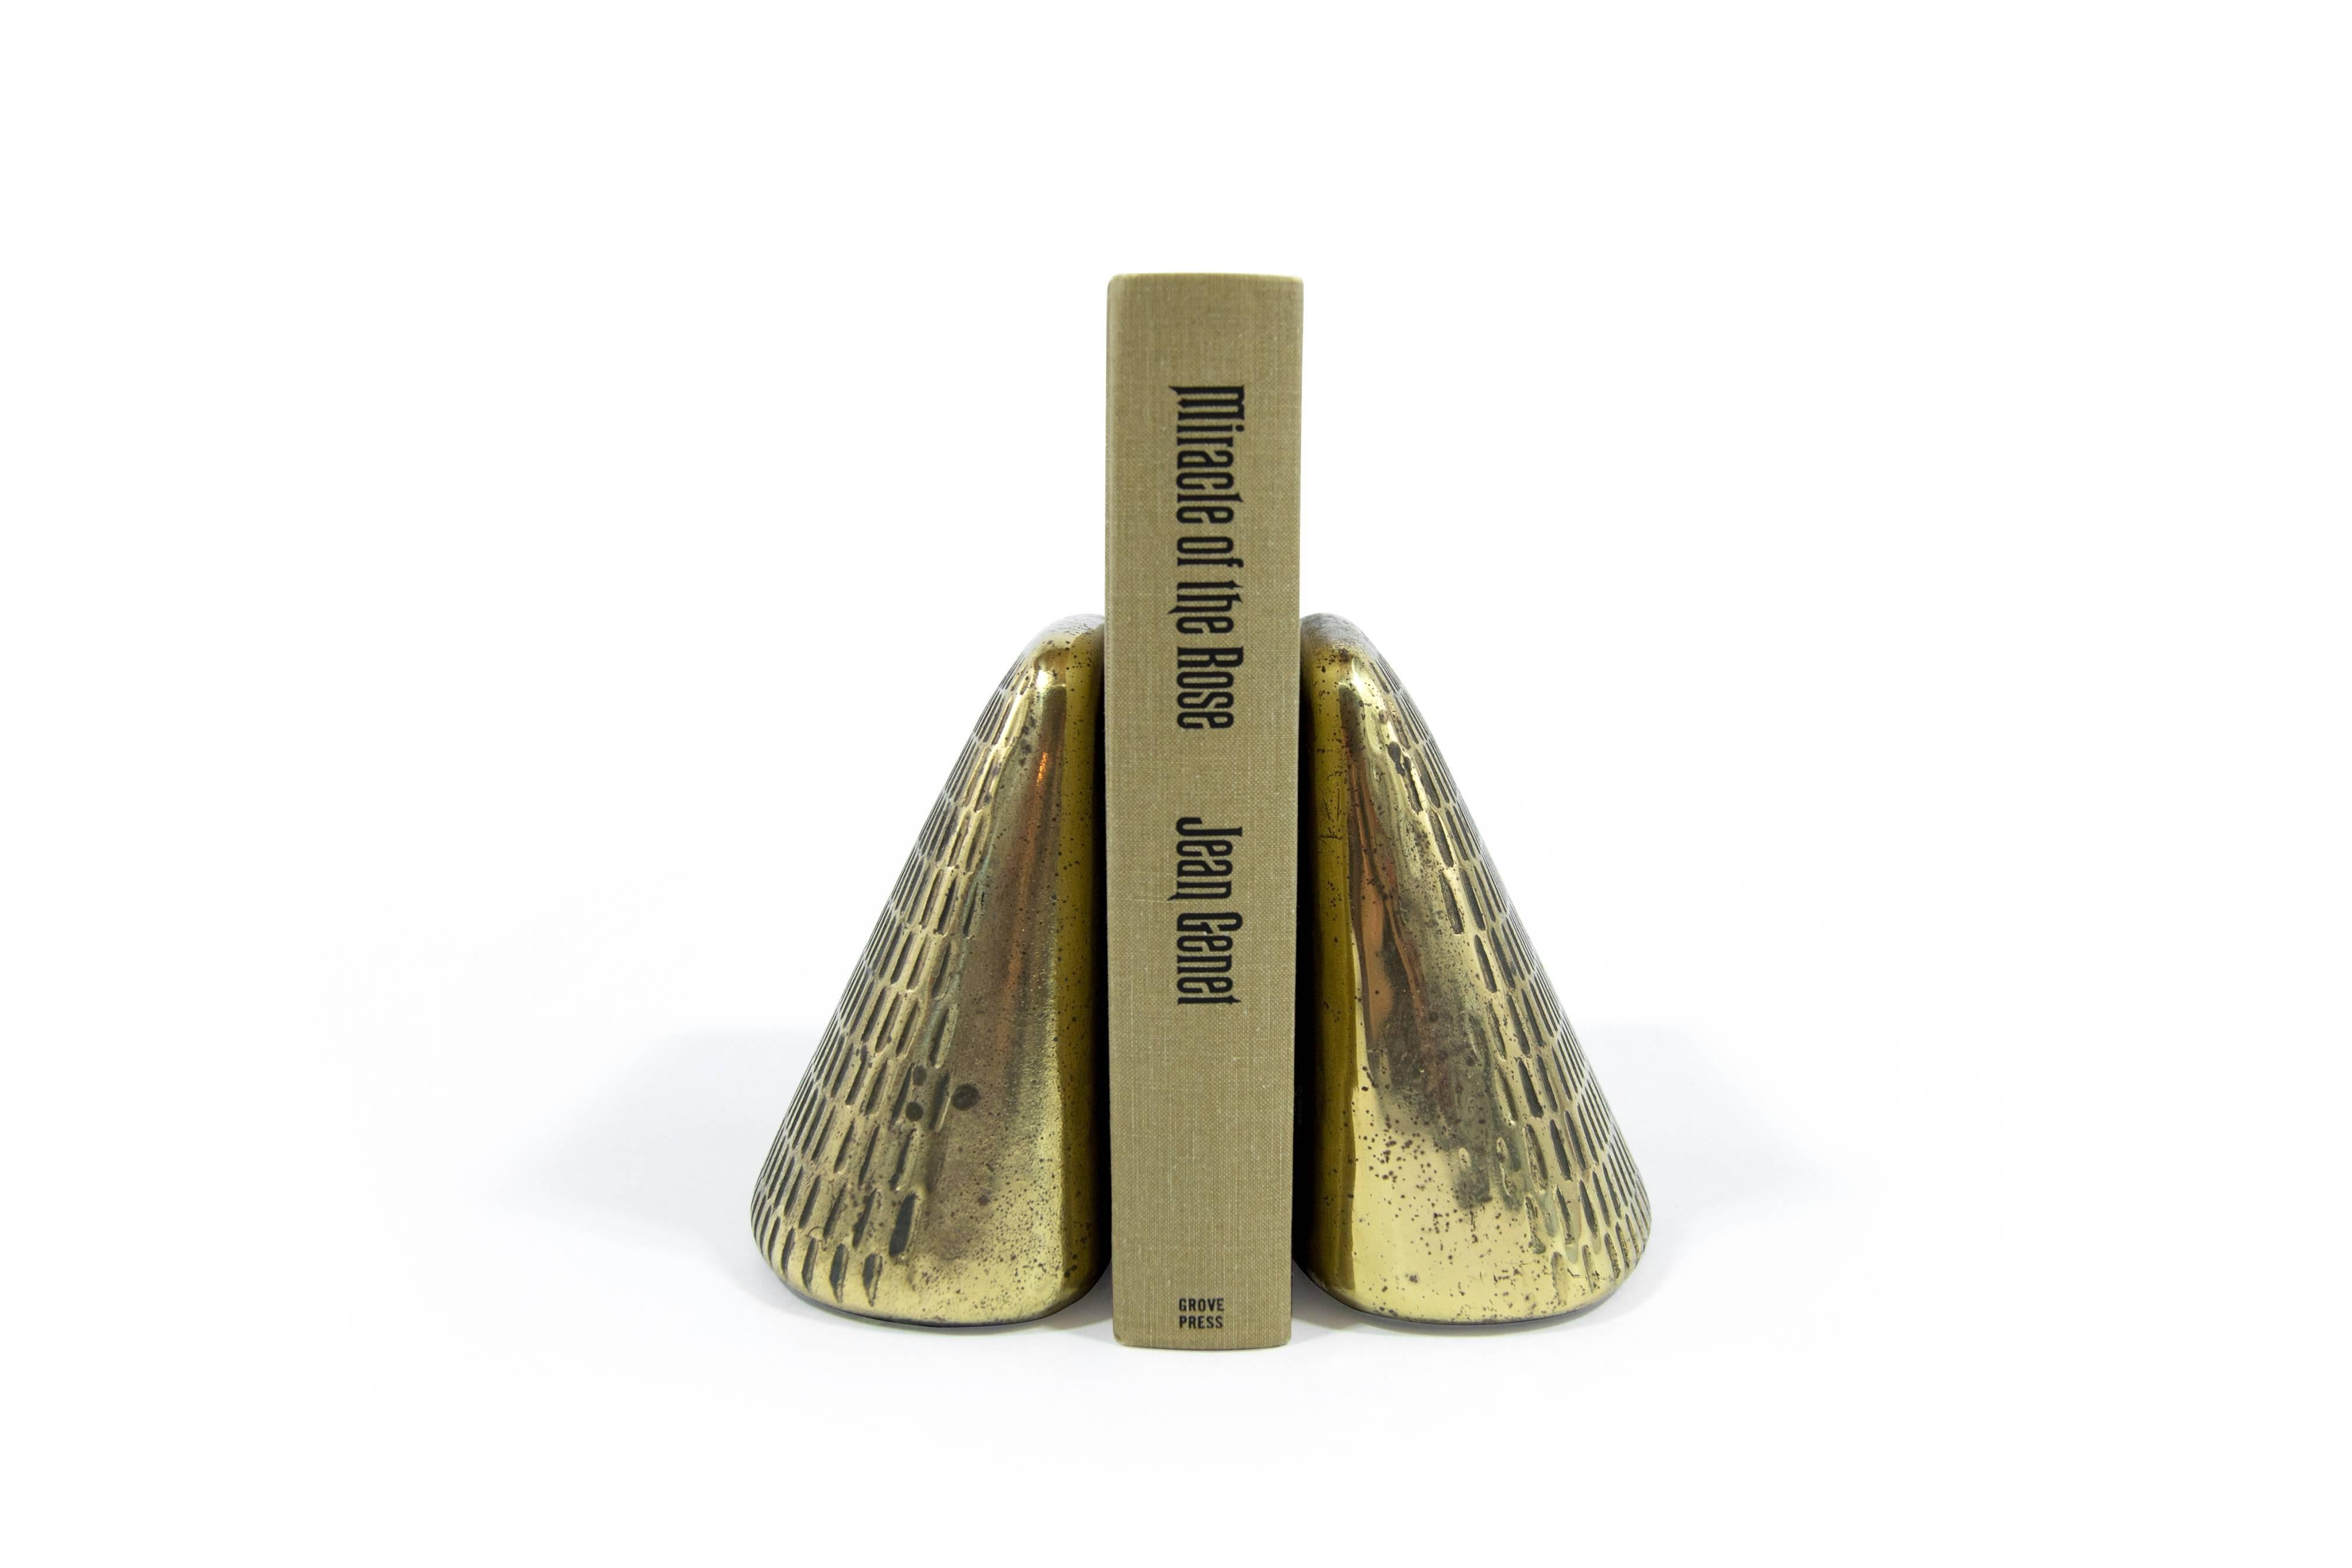 20th Century Pyramid Bookends by Ben Seibel for Jenfred Ware